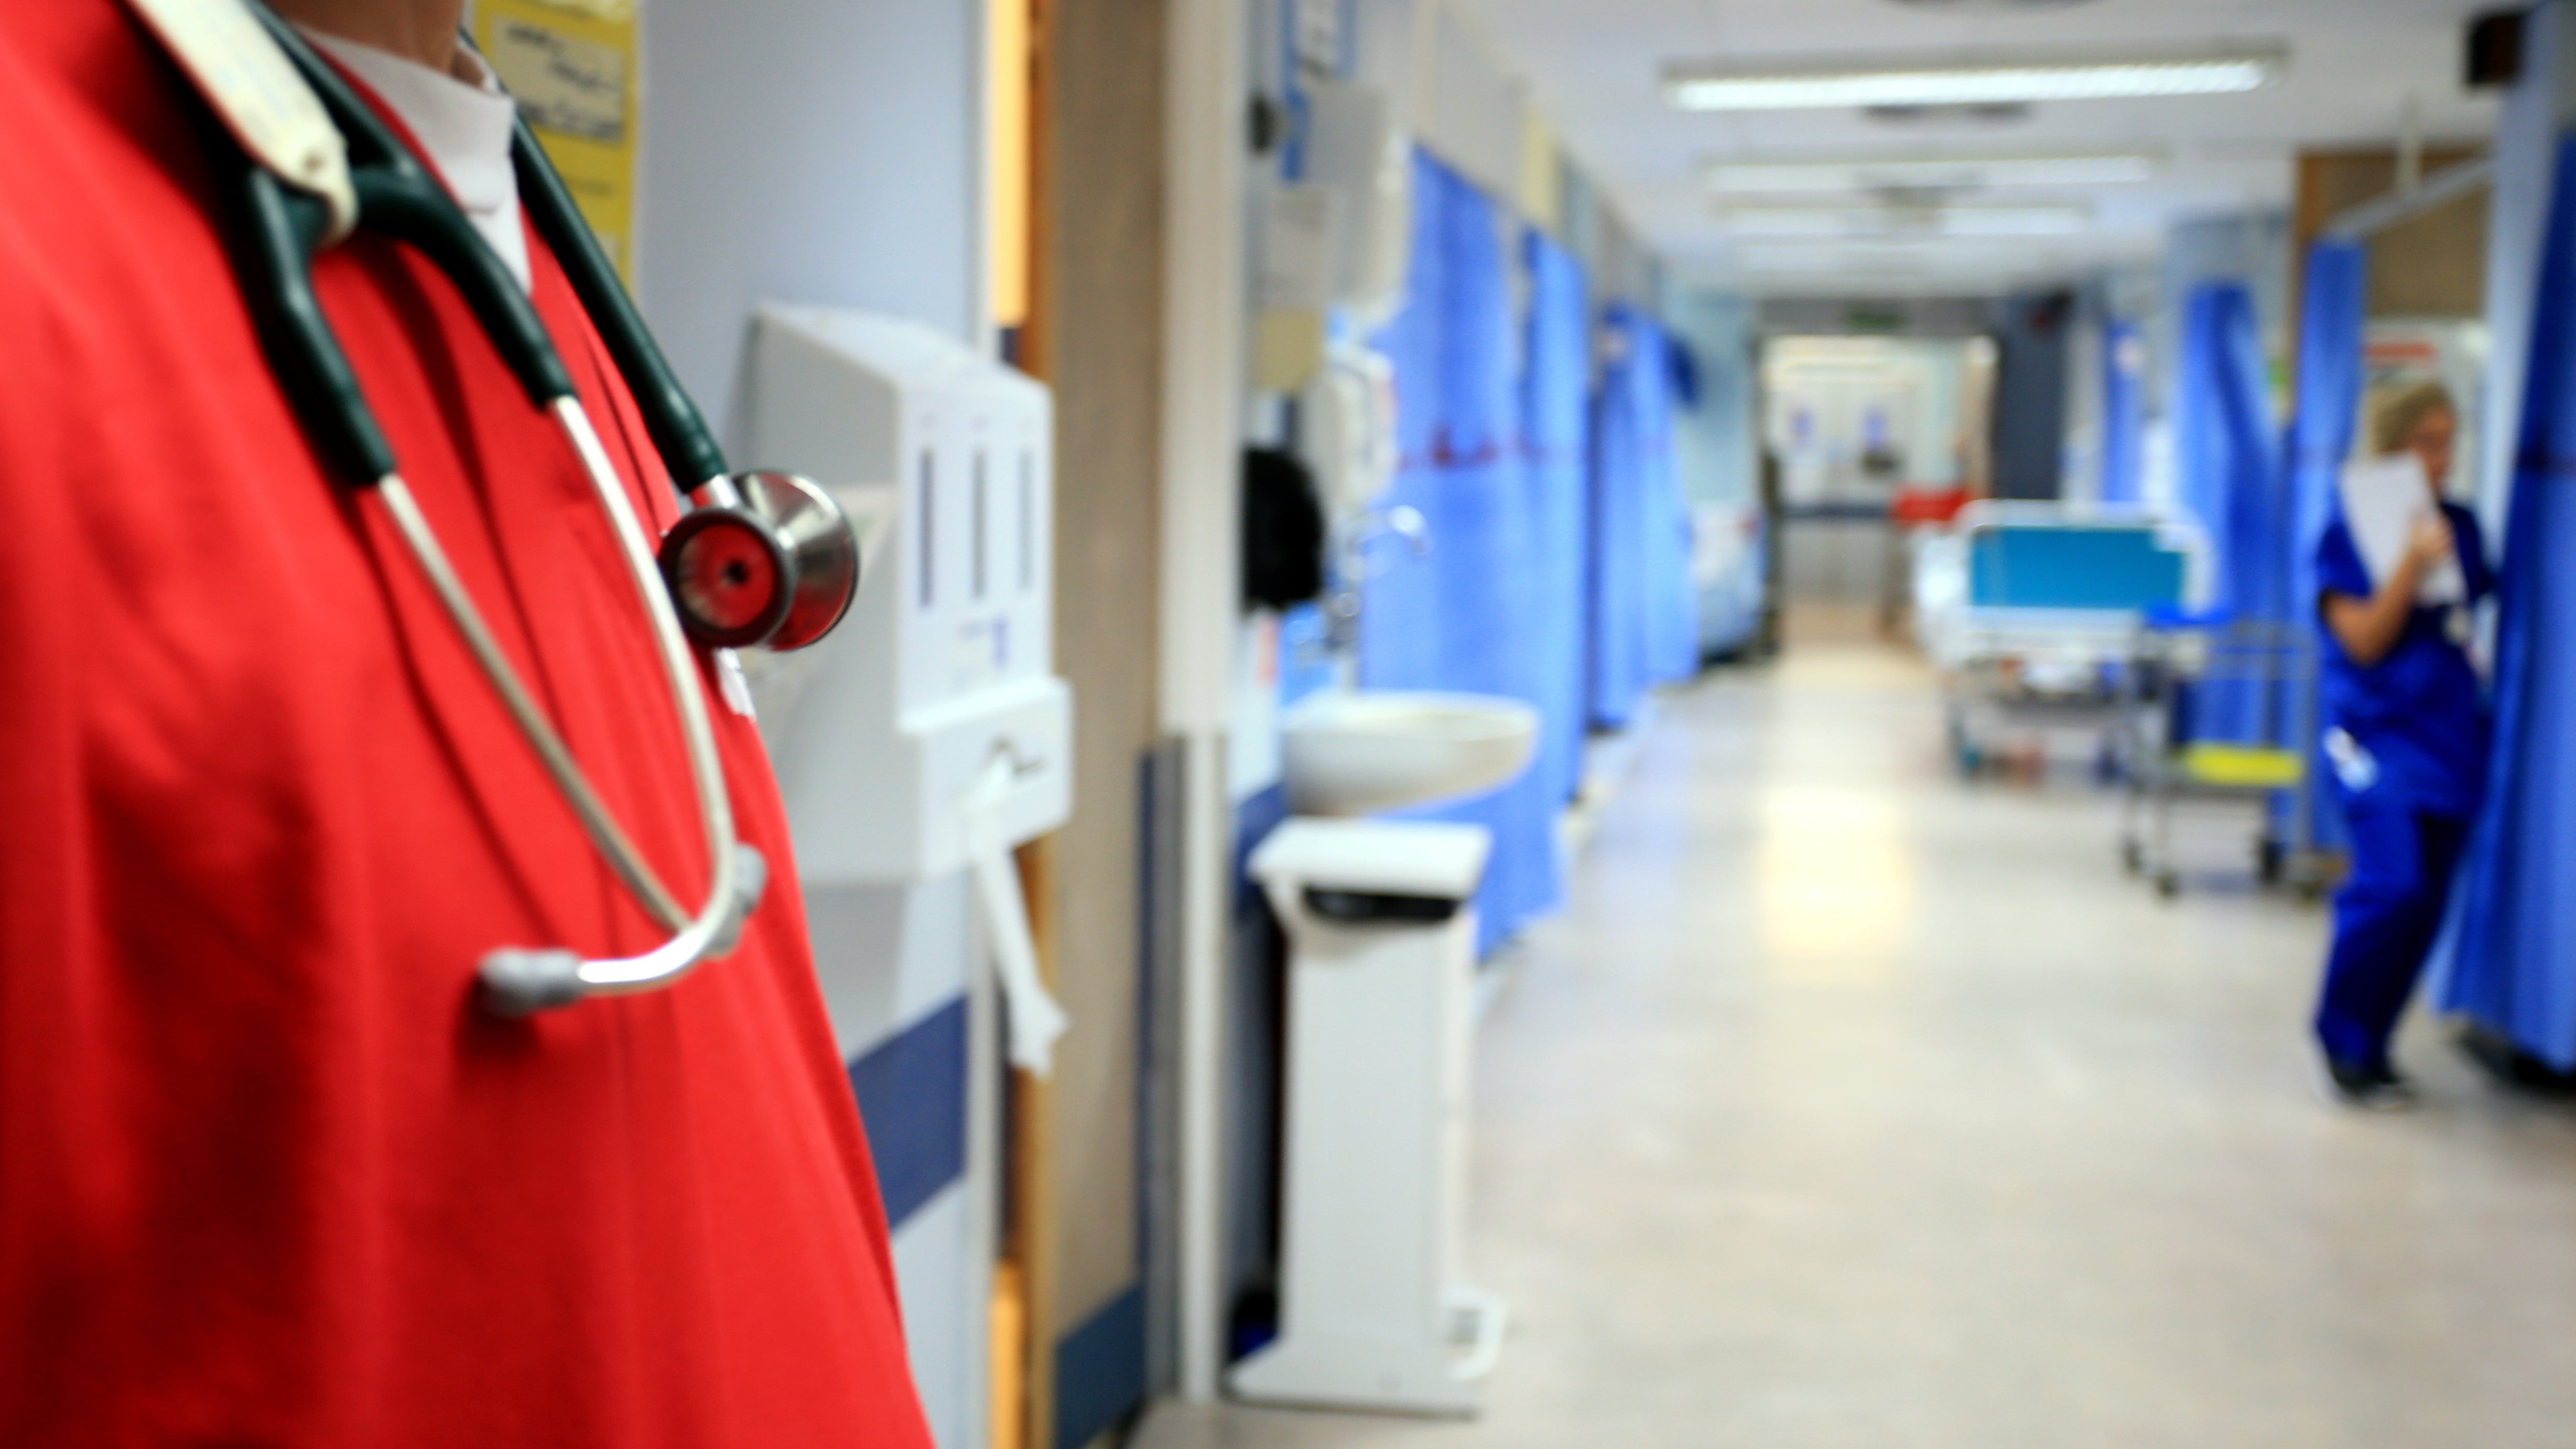 NHS figures show the size of the waiting list for routine hospital treatment in England was unchanged in March